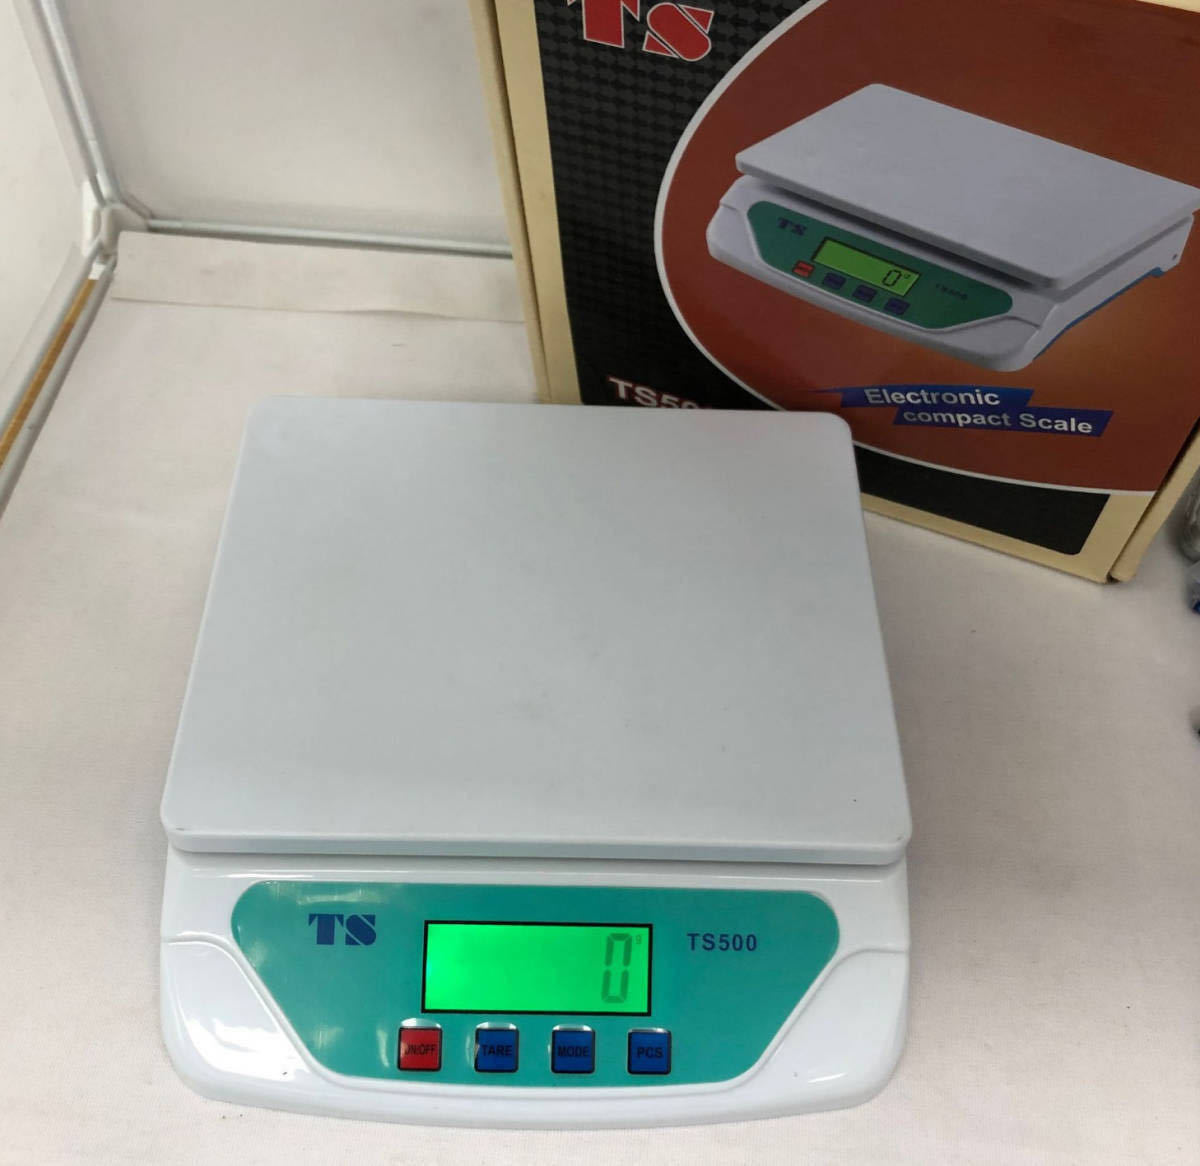  free shipping the same day delivery 1g unit maximum 30Kg till measurement possibility scale digital pcs measuring electron scales manner sack function installing auto off function 